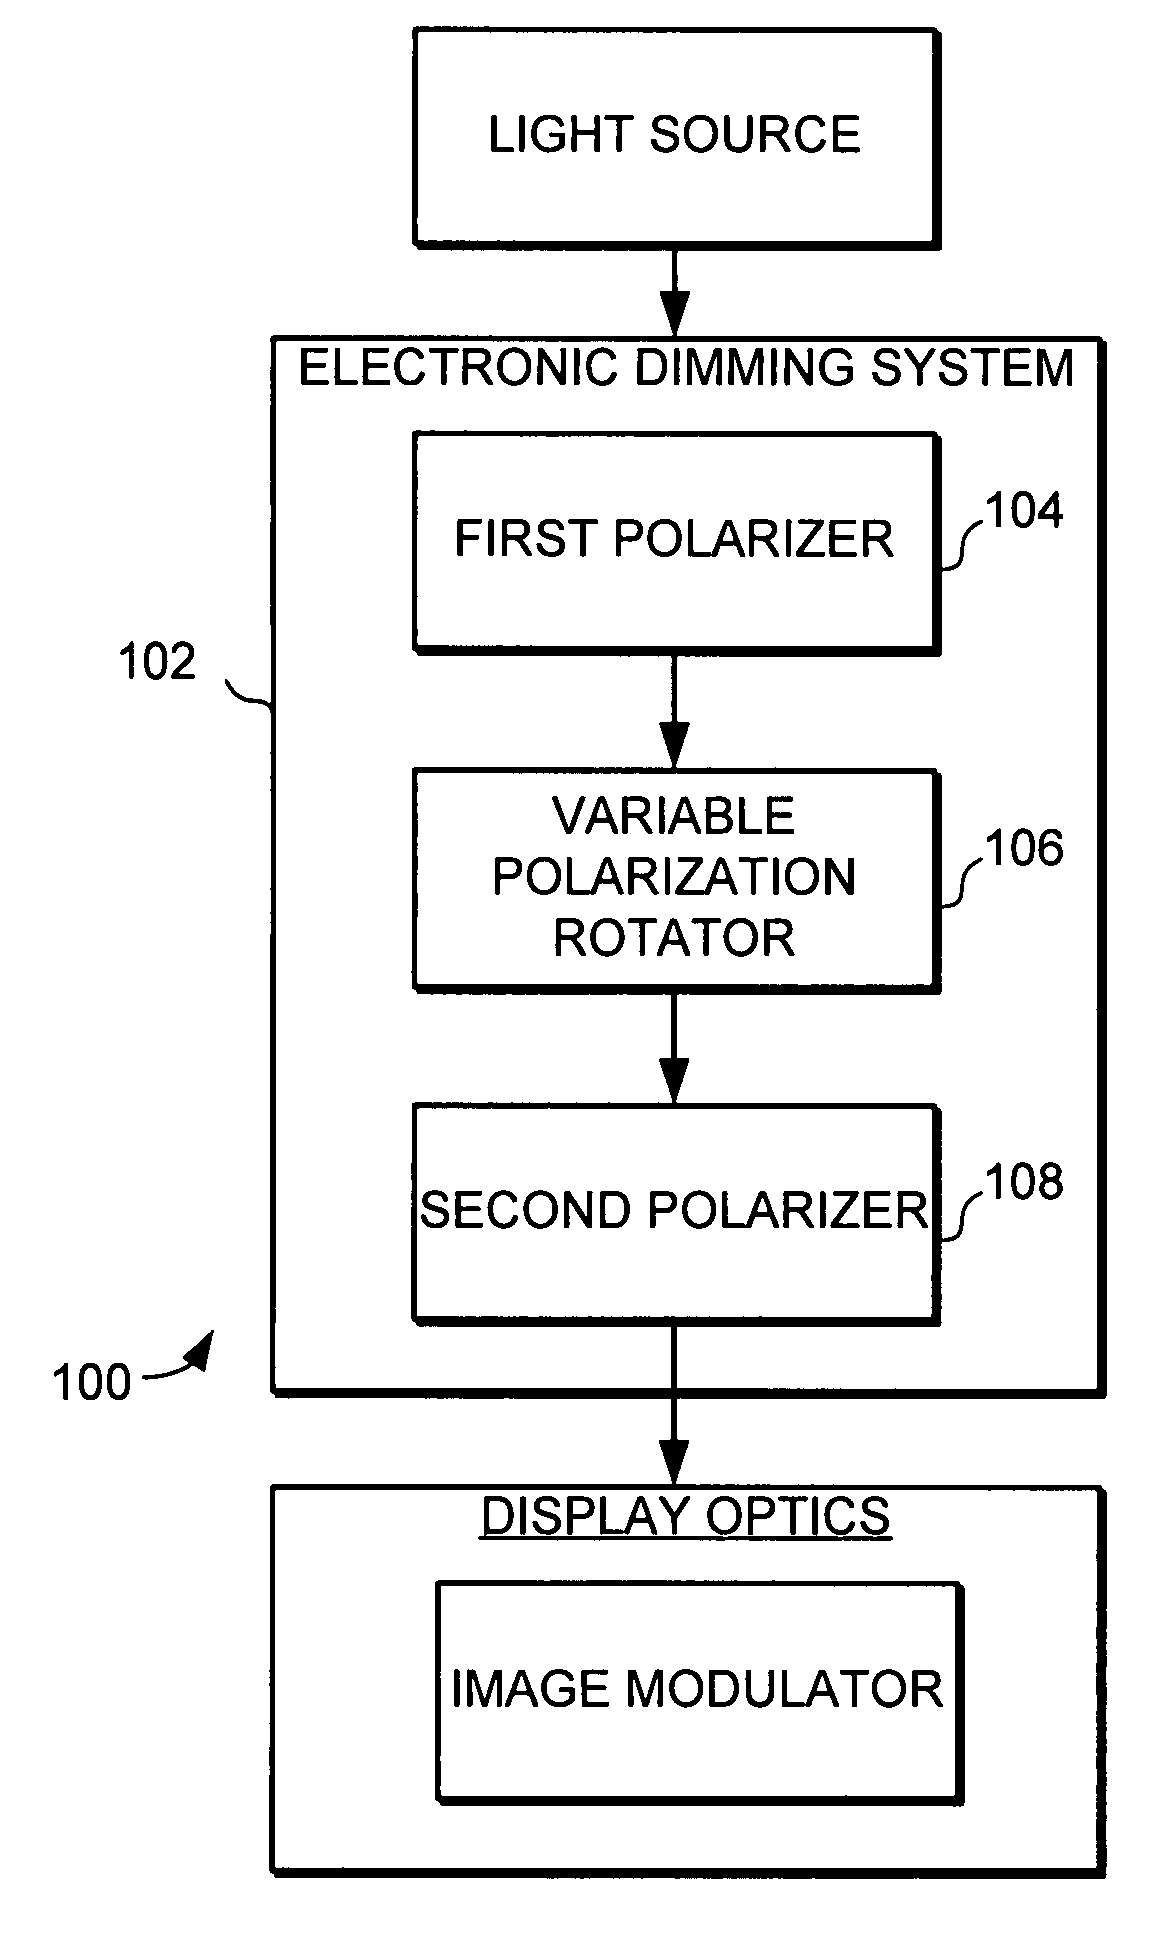 Electro-optical dimming system